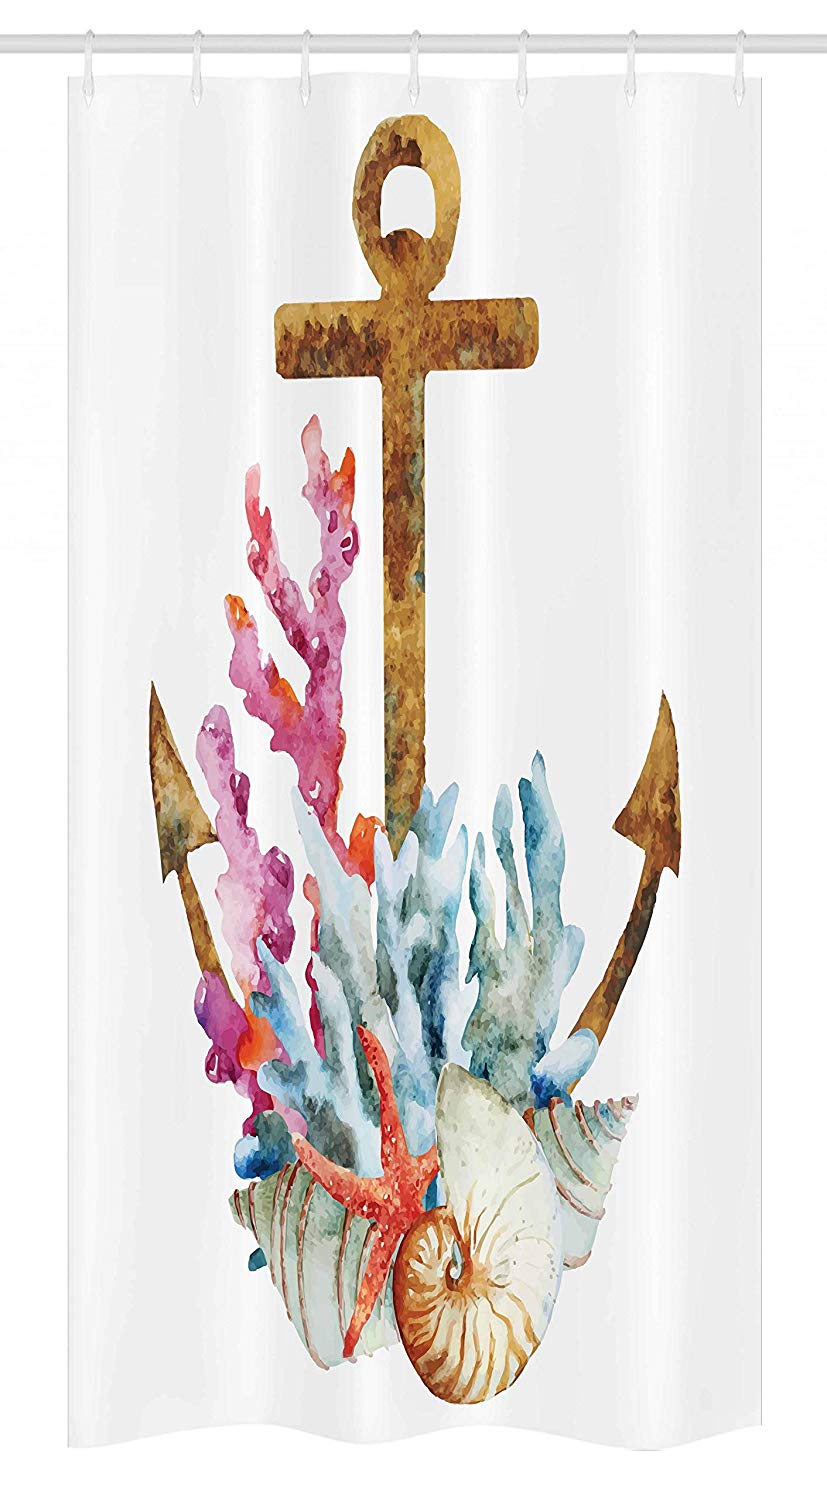 Ambesonne Anchor Stall Shower Curtain, Anchor with Corals Seaweed Nature Deep Sea Underwater Life Diving Enjoyment, Fabric Bathroom Decor Set with Hooks, 36